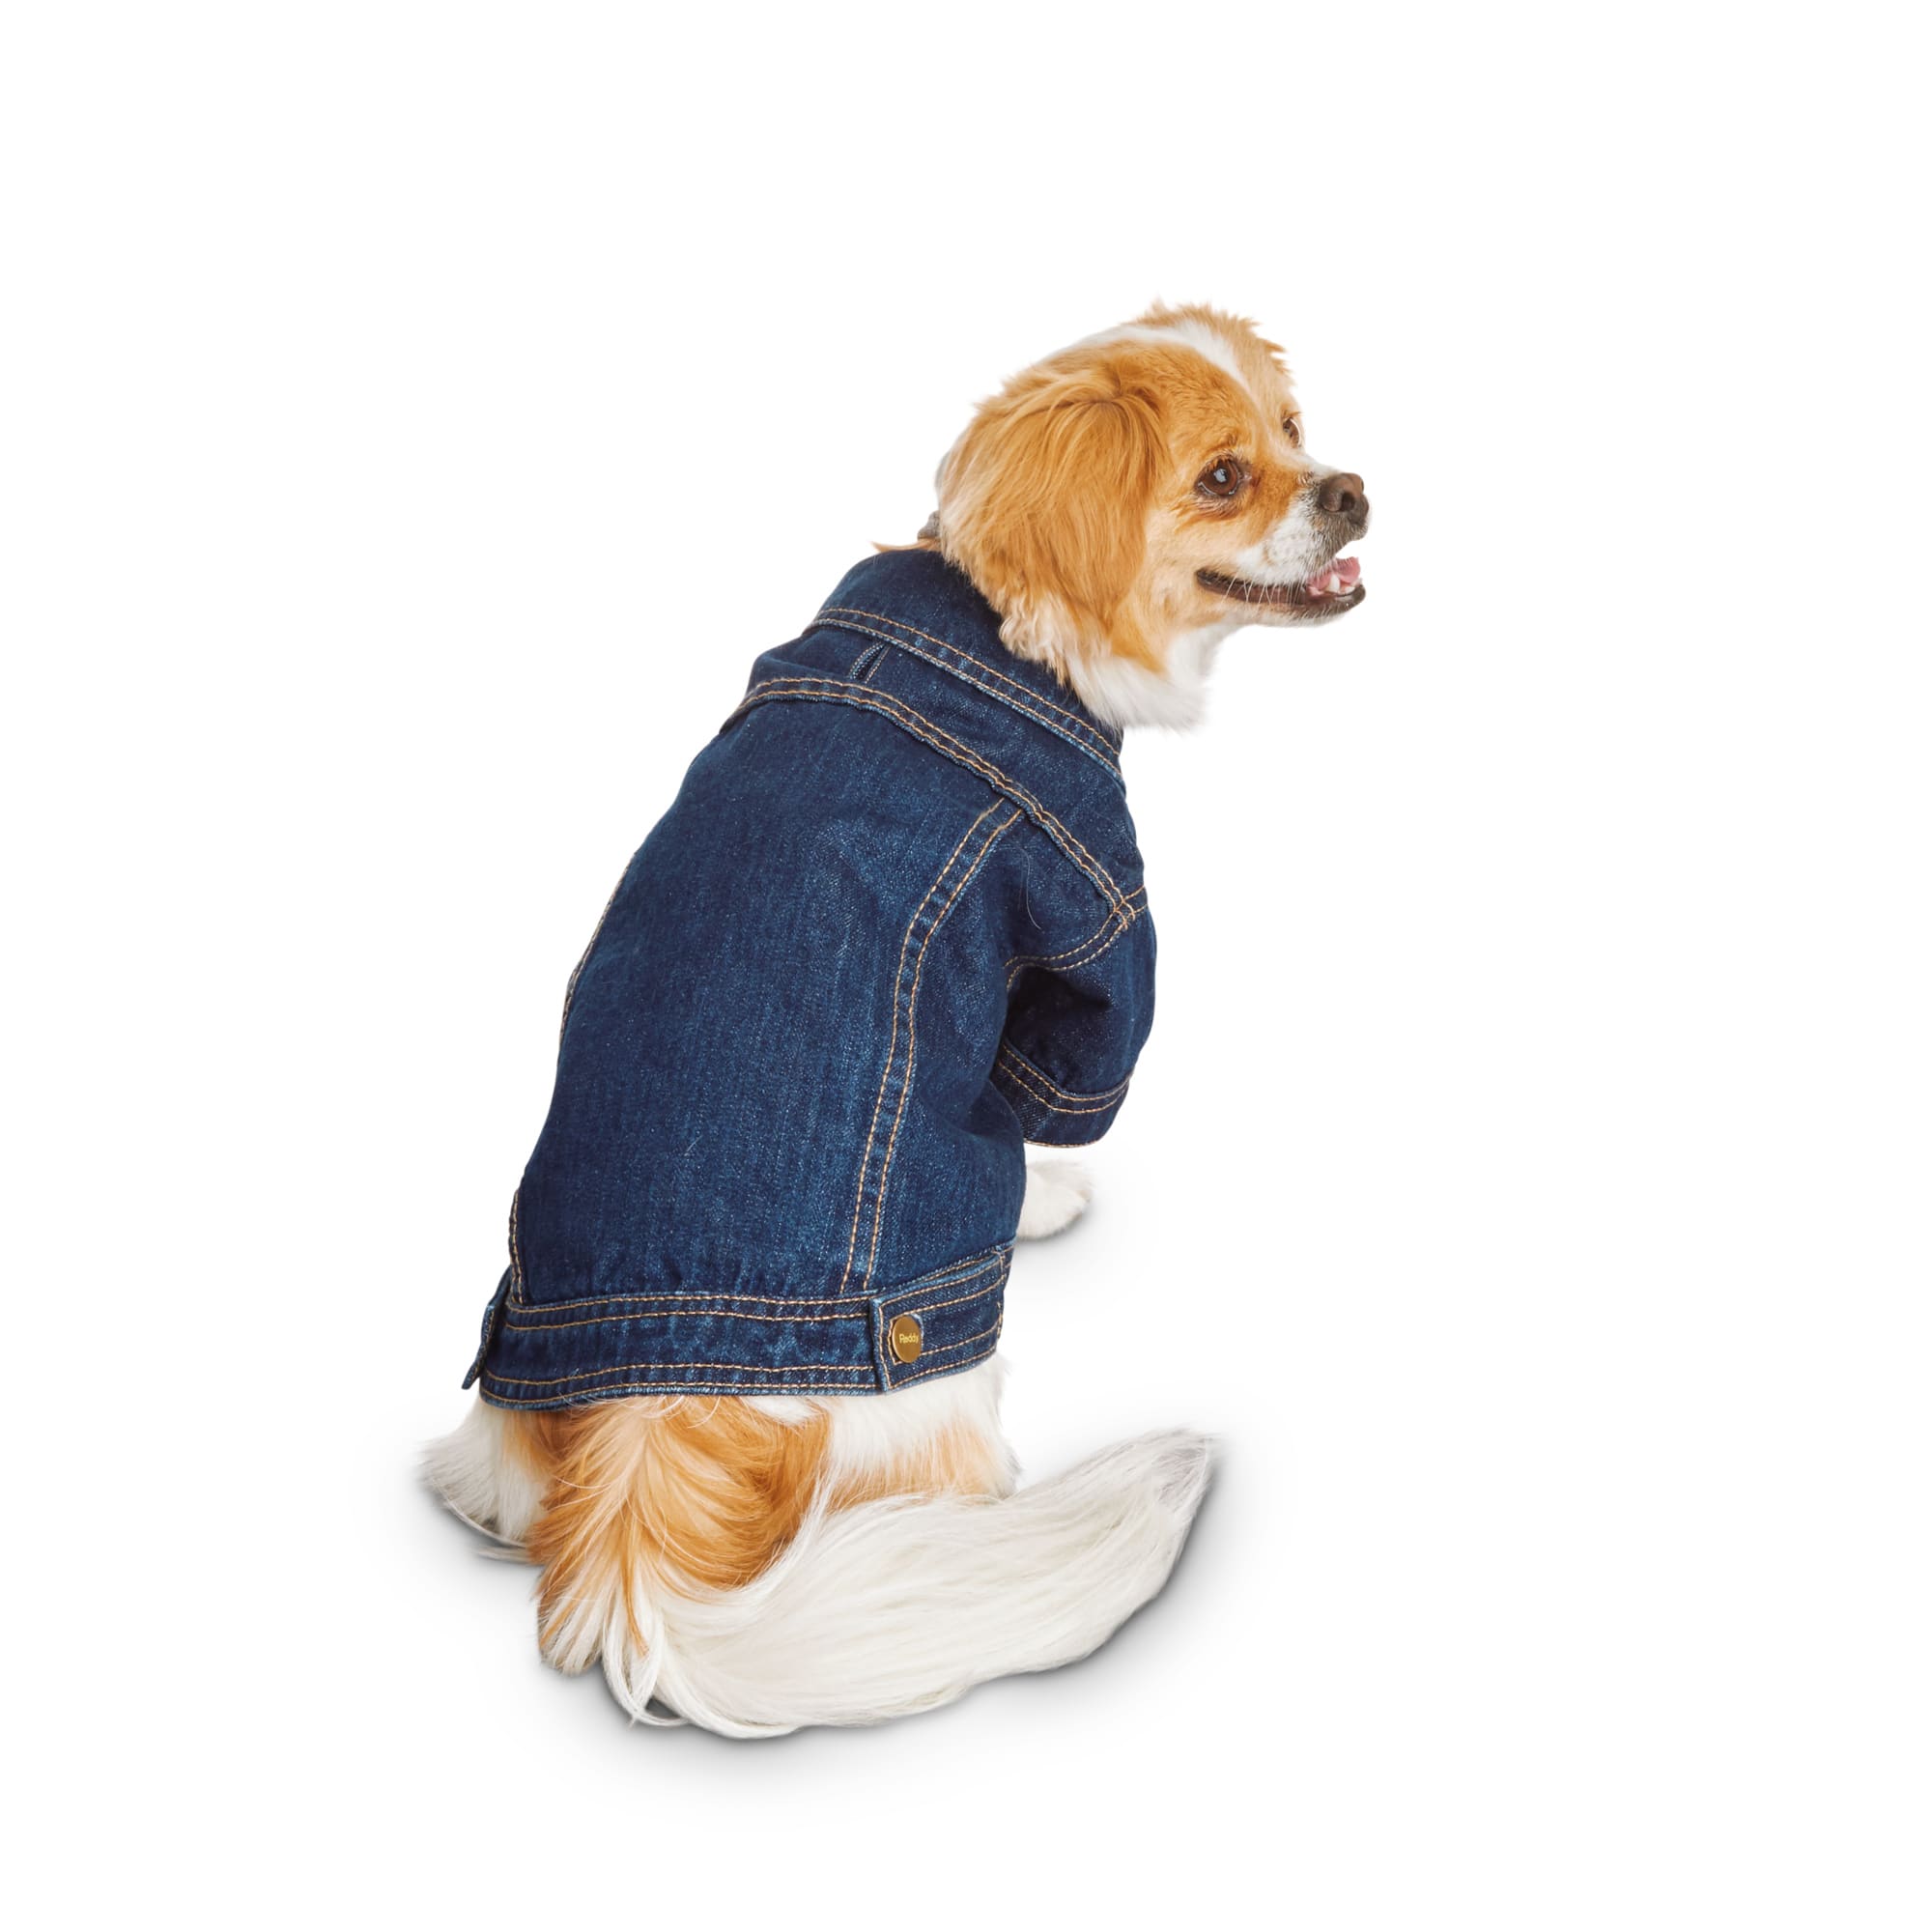 jean jacket for small dogs